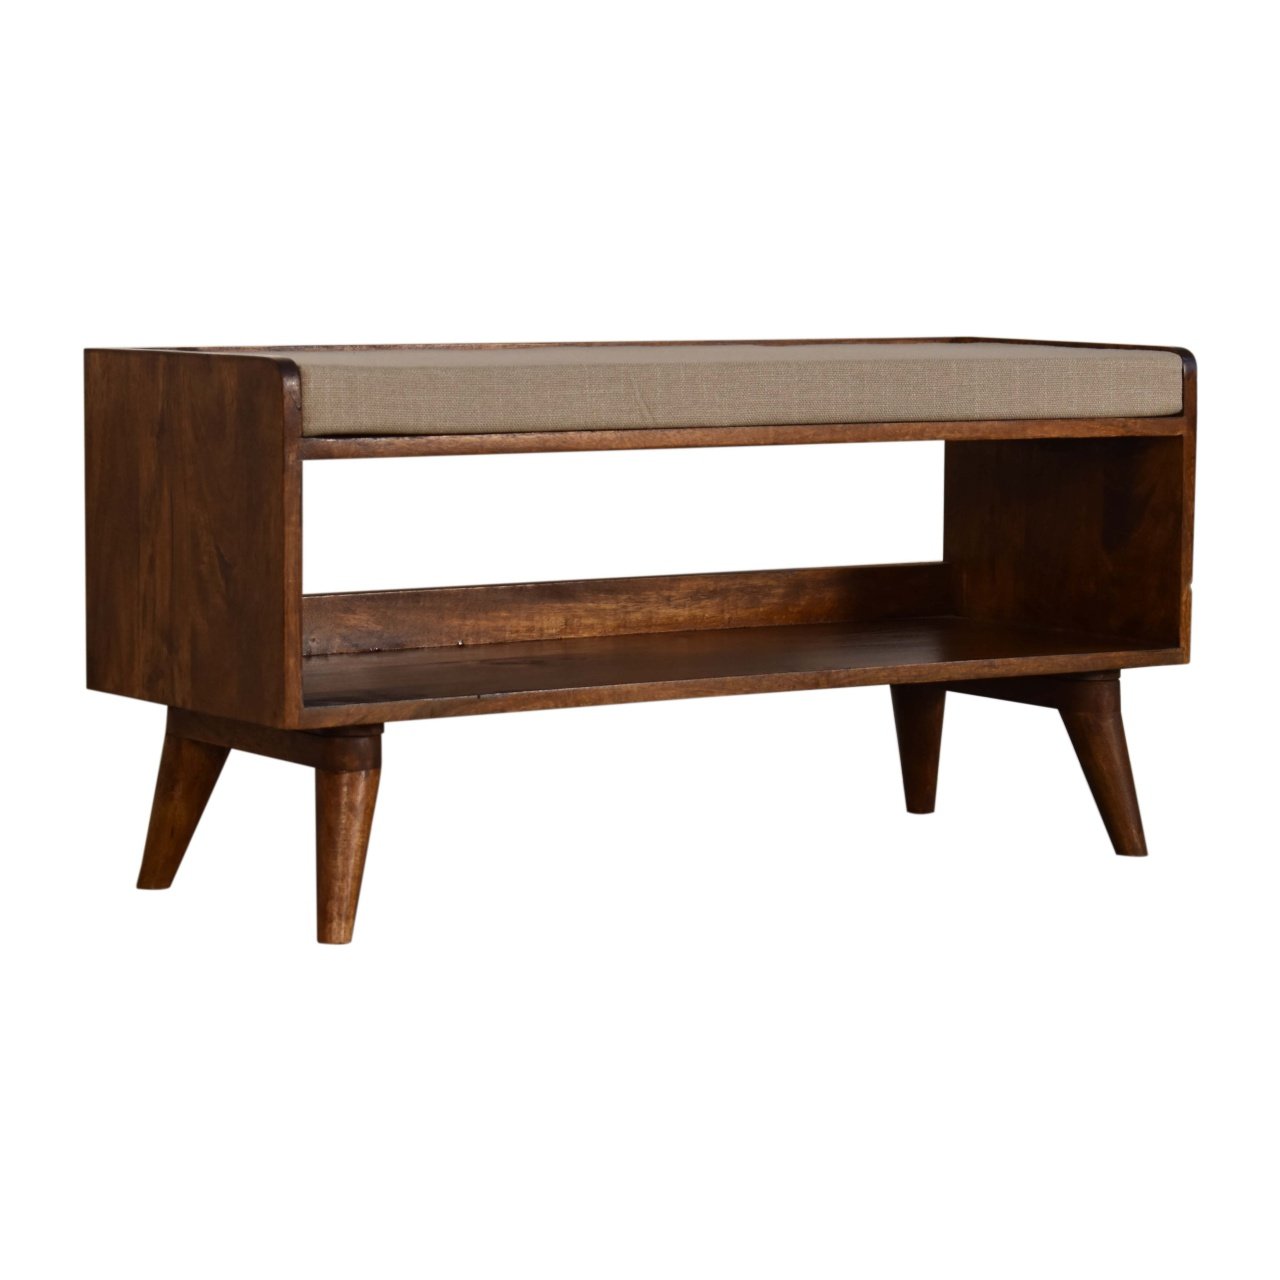 Nordic Chestnut Finish Storage Bench with Seat Pad